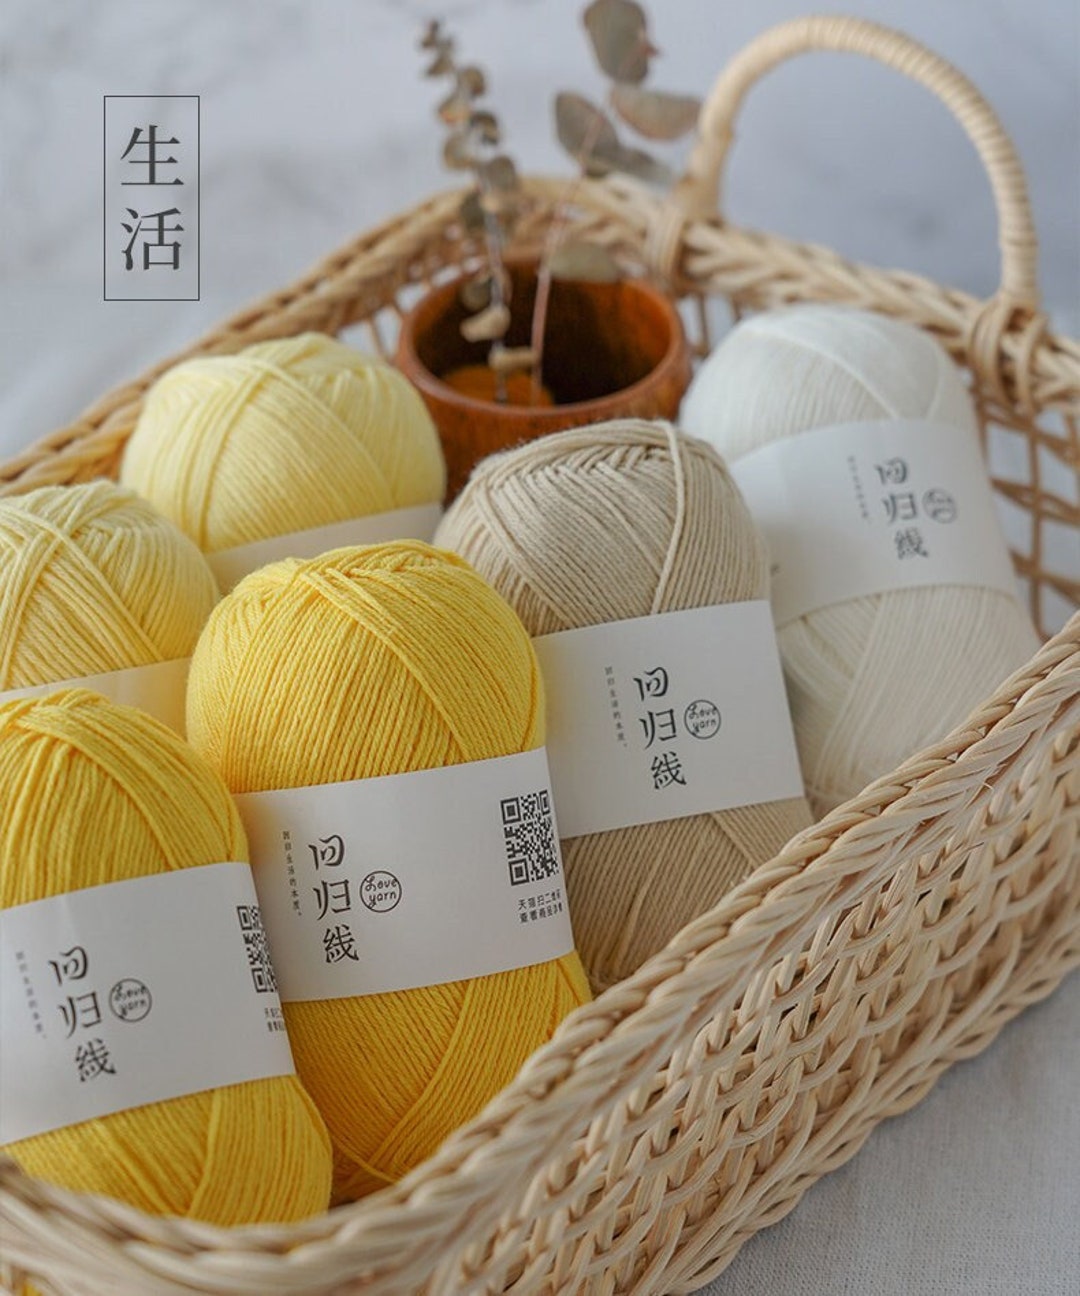 28 Milk Colors 1.5mm High Quality Fine Soft Yarn for Knitting 